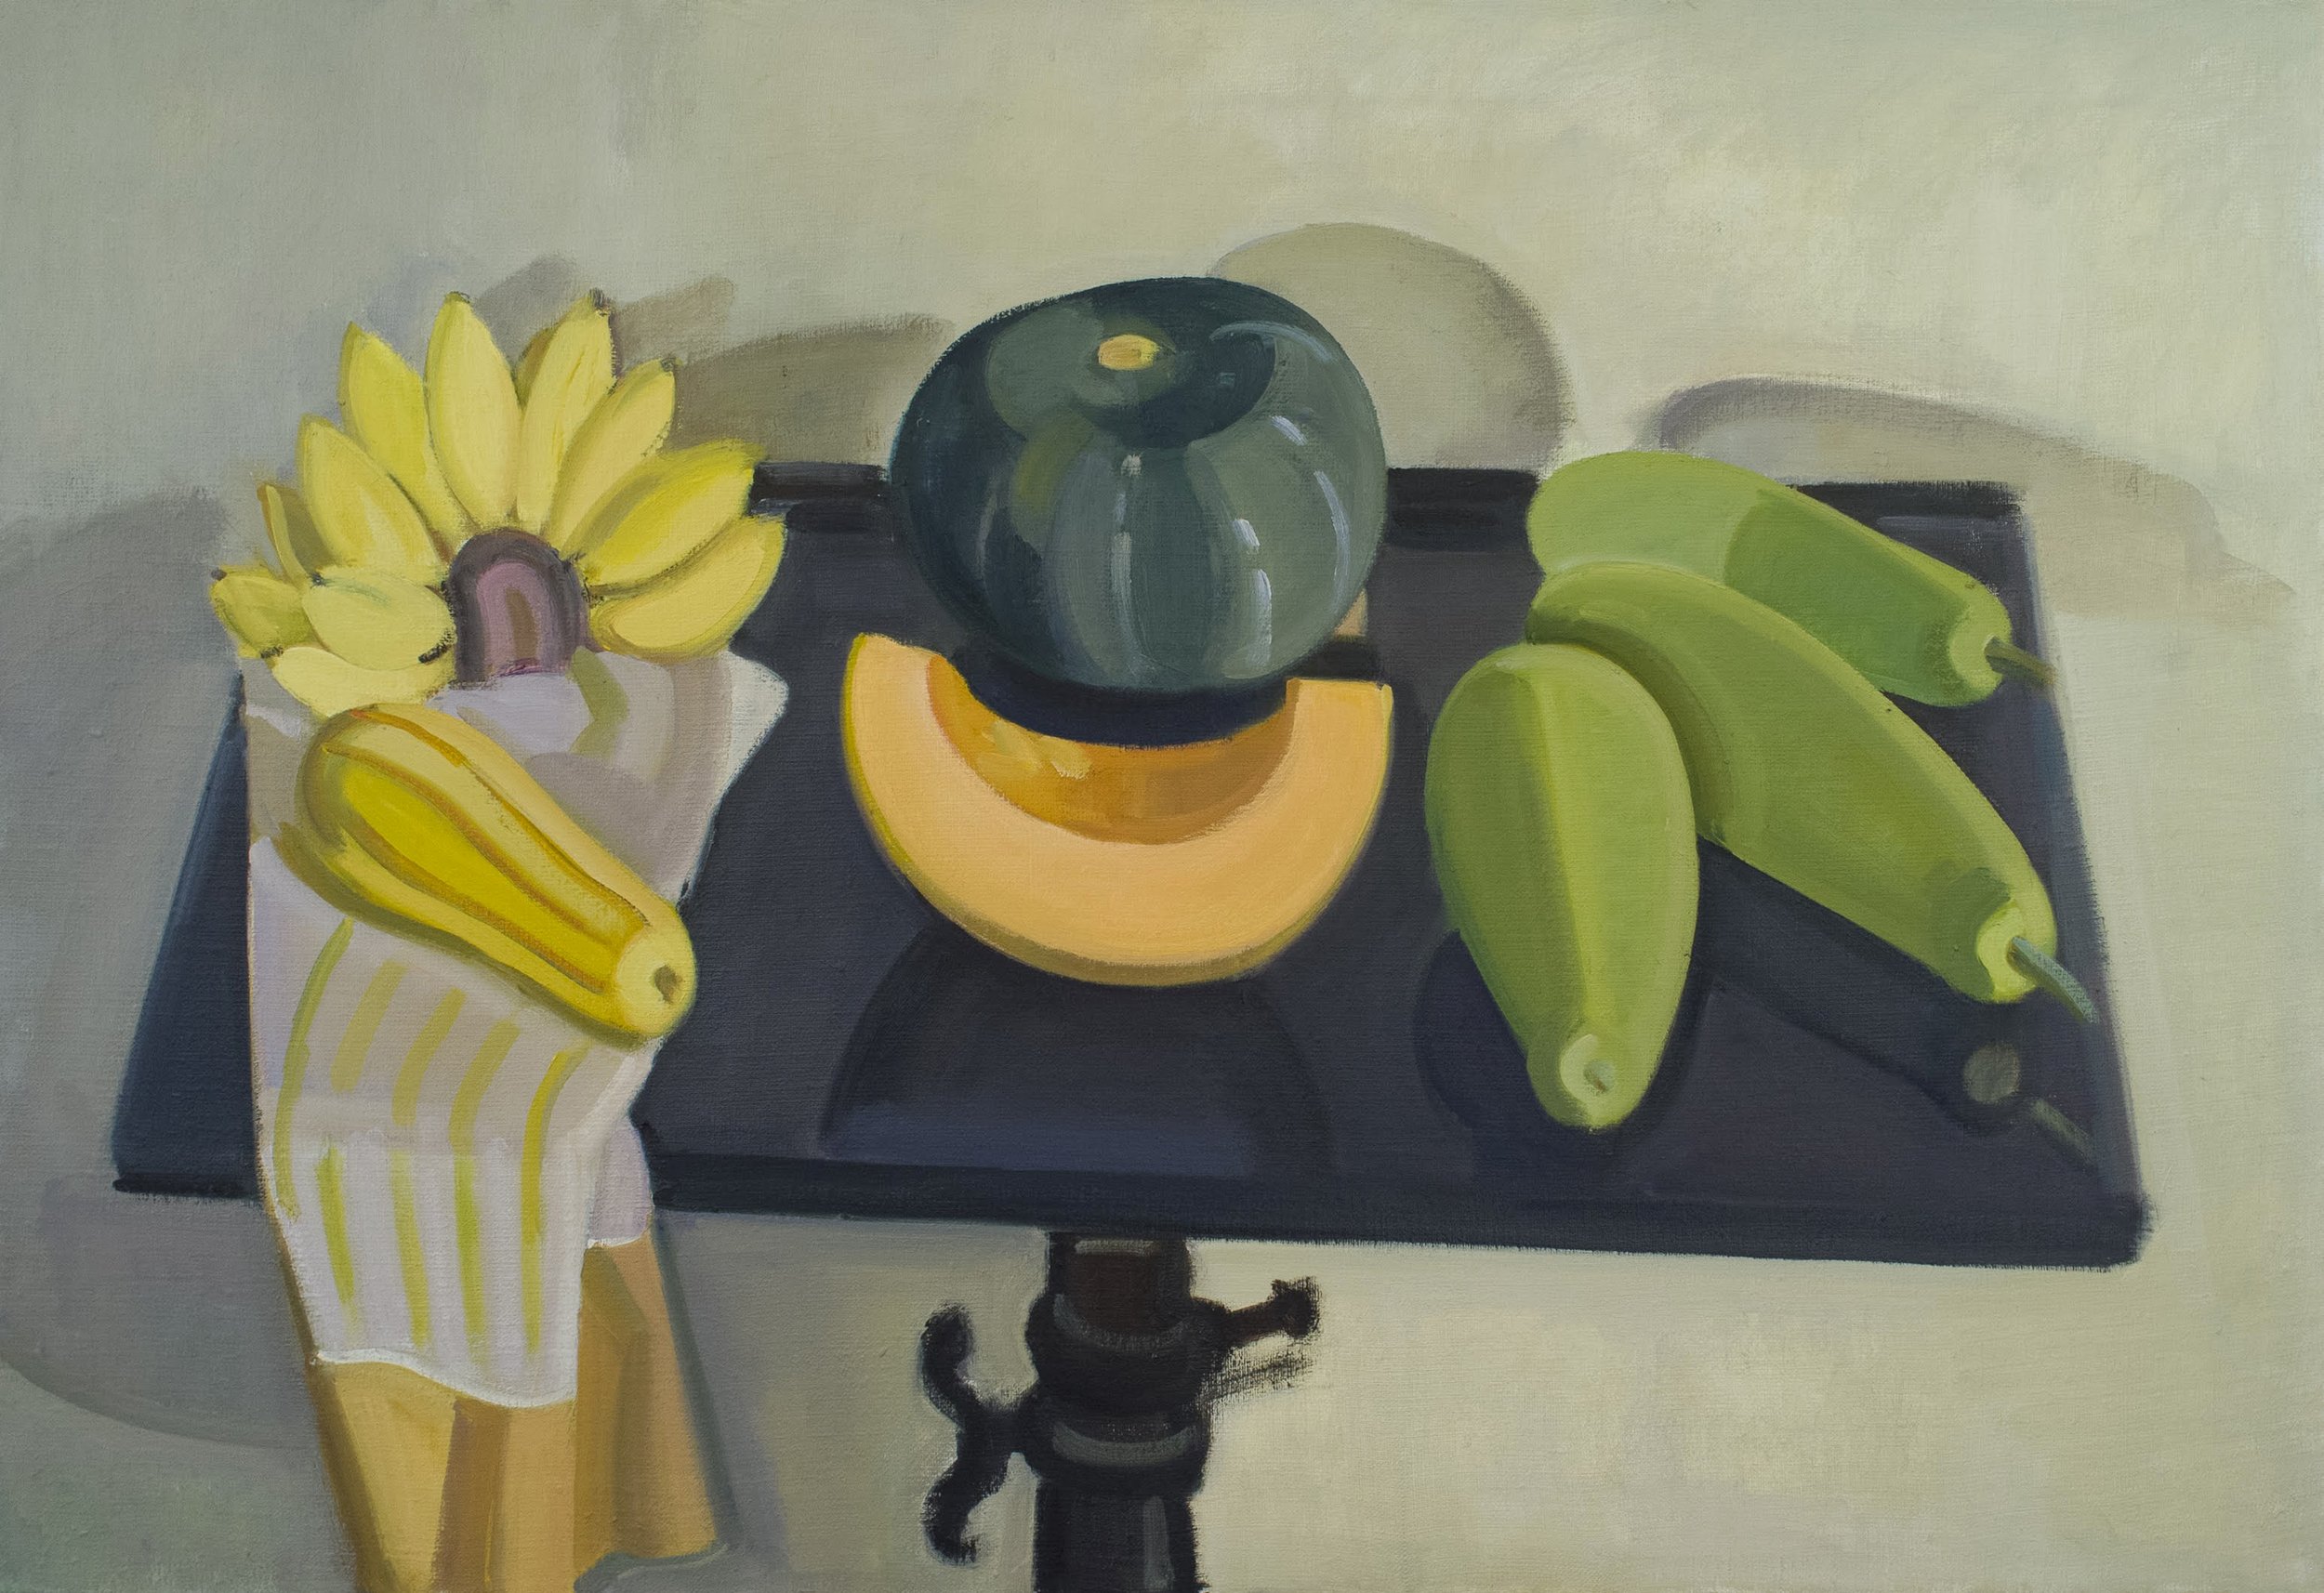   Bananas and Squashes on Black Drawing Table , c. 2003, oil/canvas, 22 x 32 in. (Private collection) 